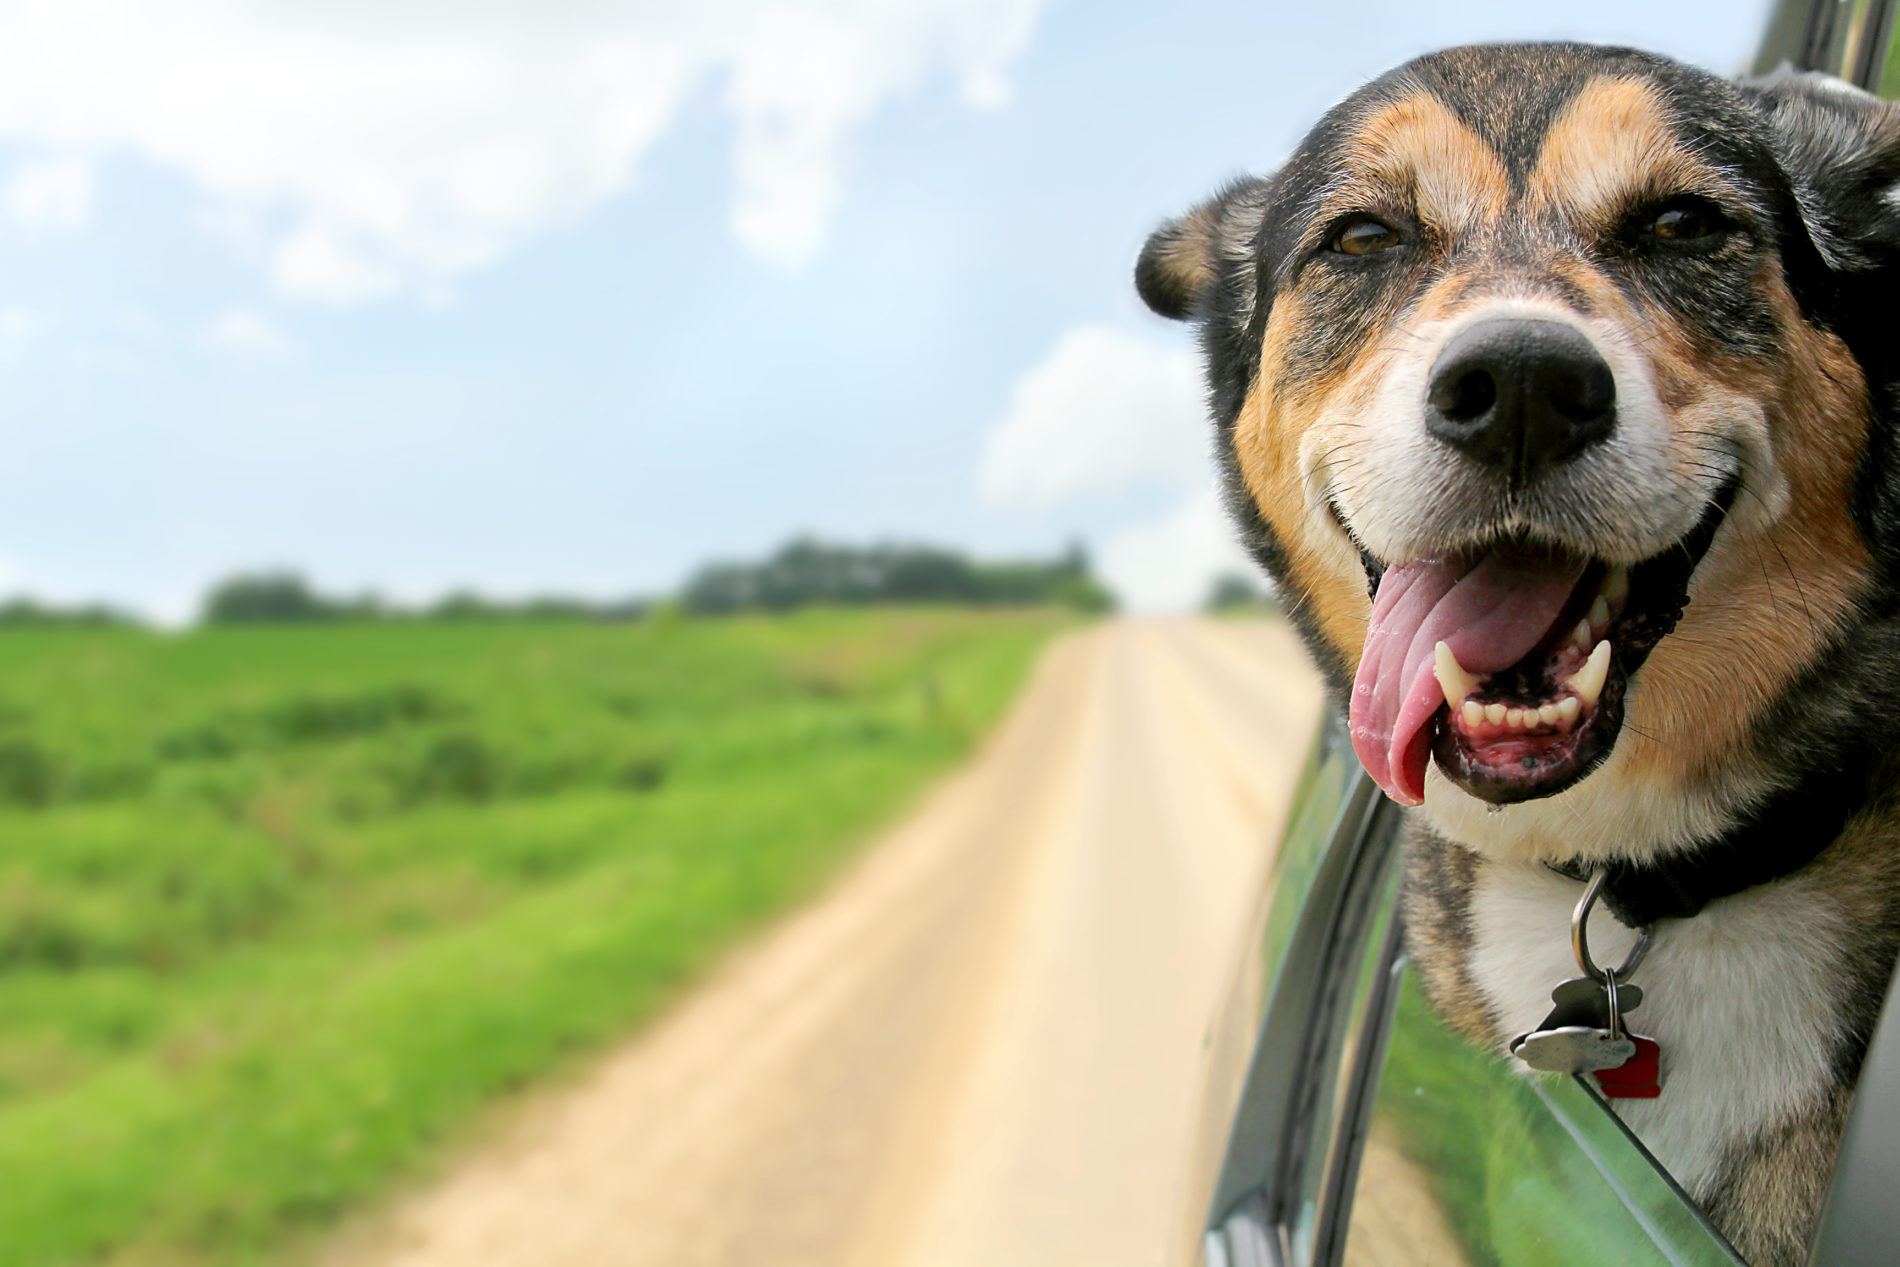 Happy dog hanging out of a car window while being driven down a dirt road beside a green field.